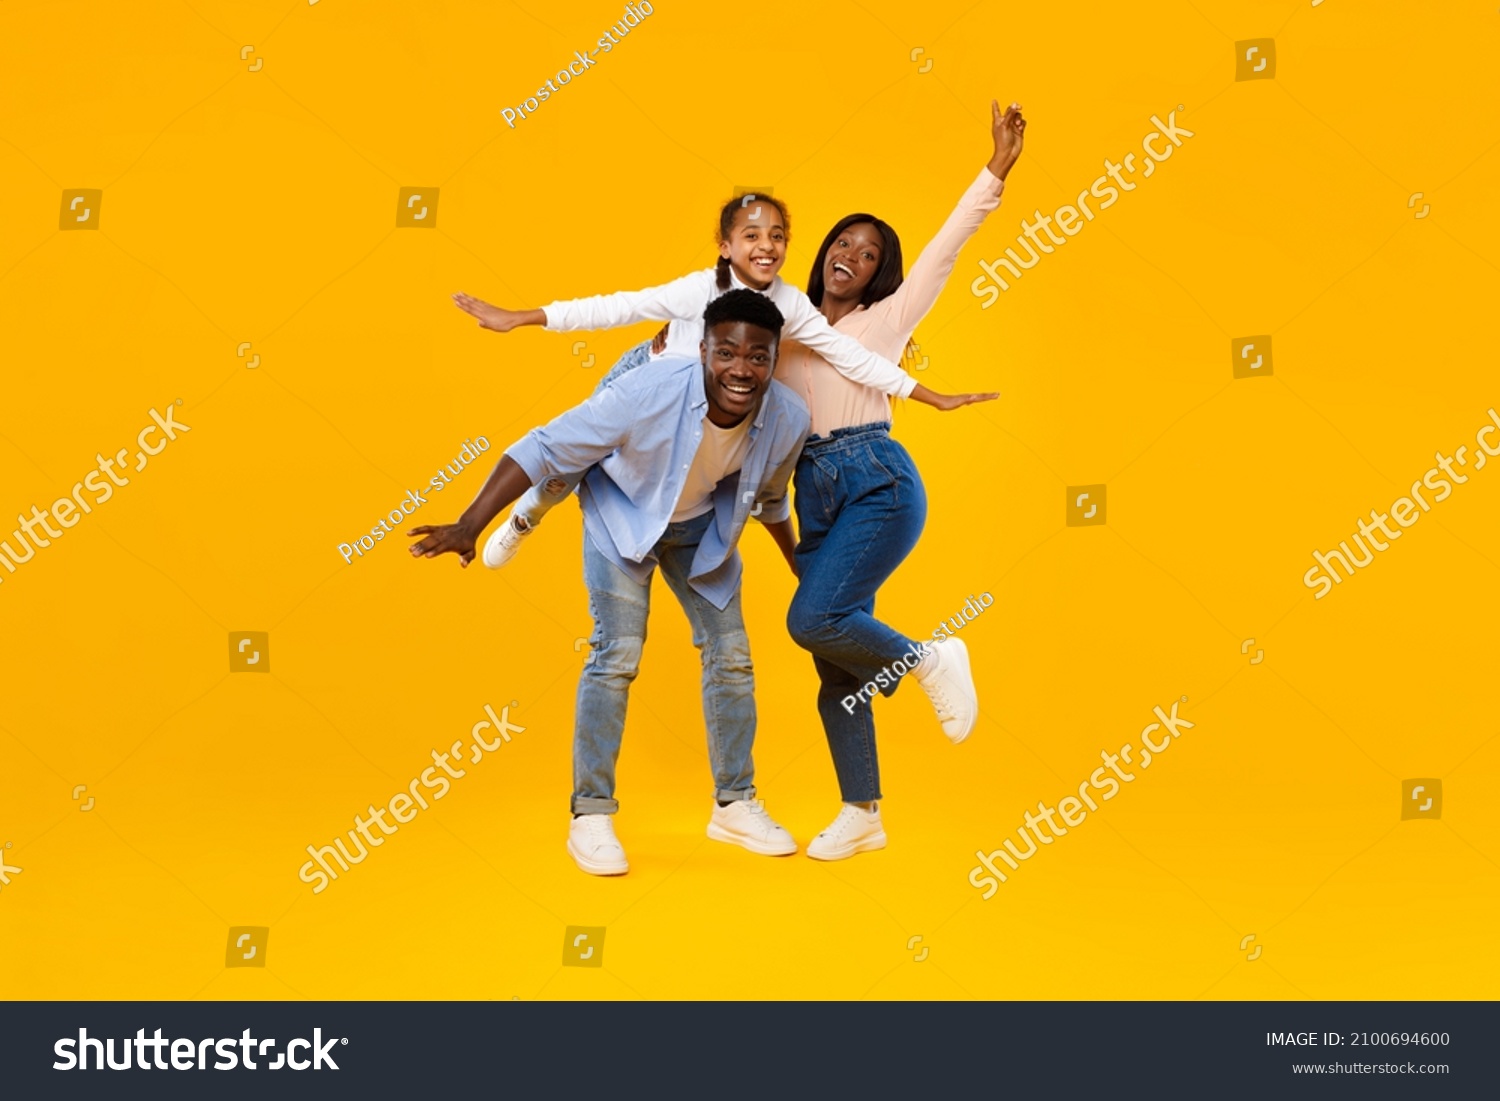 Spending Time With Family Is Fun. Full body length of excited African American man, woman and girl laughing and posing isolated on yellow studio wall. Cheerful father carrying daughter on back, banner #2100694600